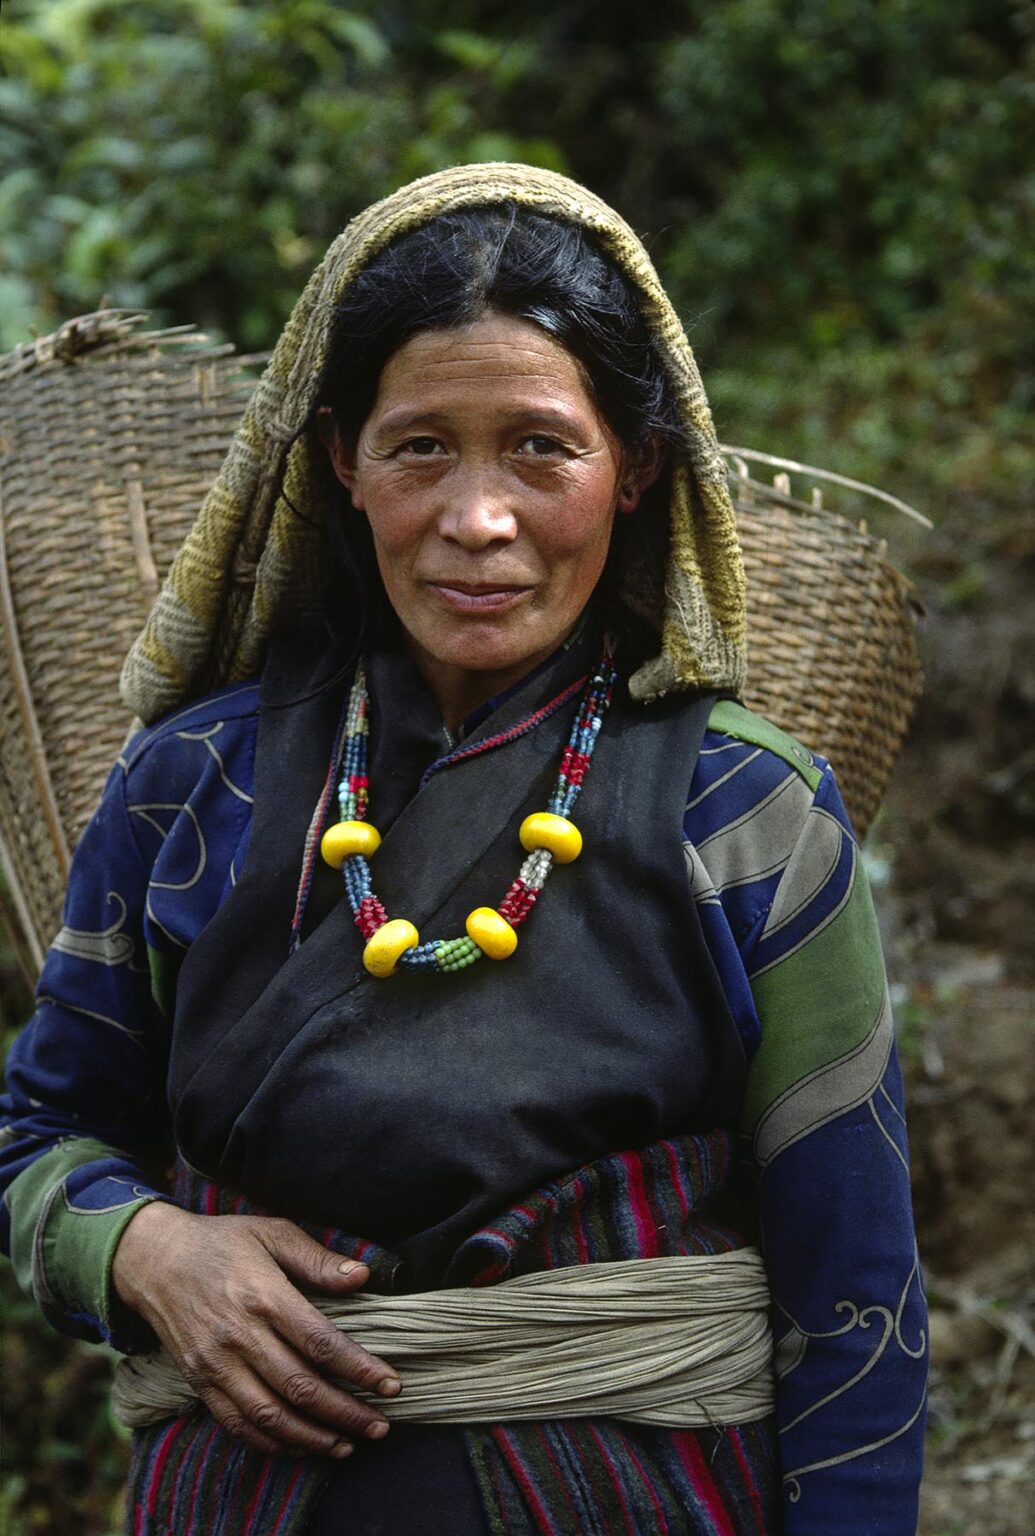 Sherpa woman carrying a dolko - SOLU DISTRICT of NEPAL